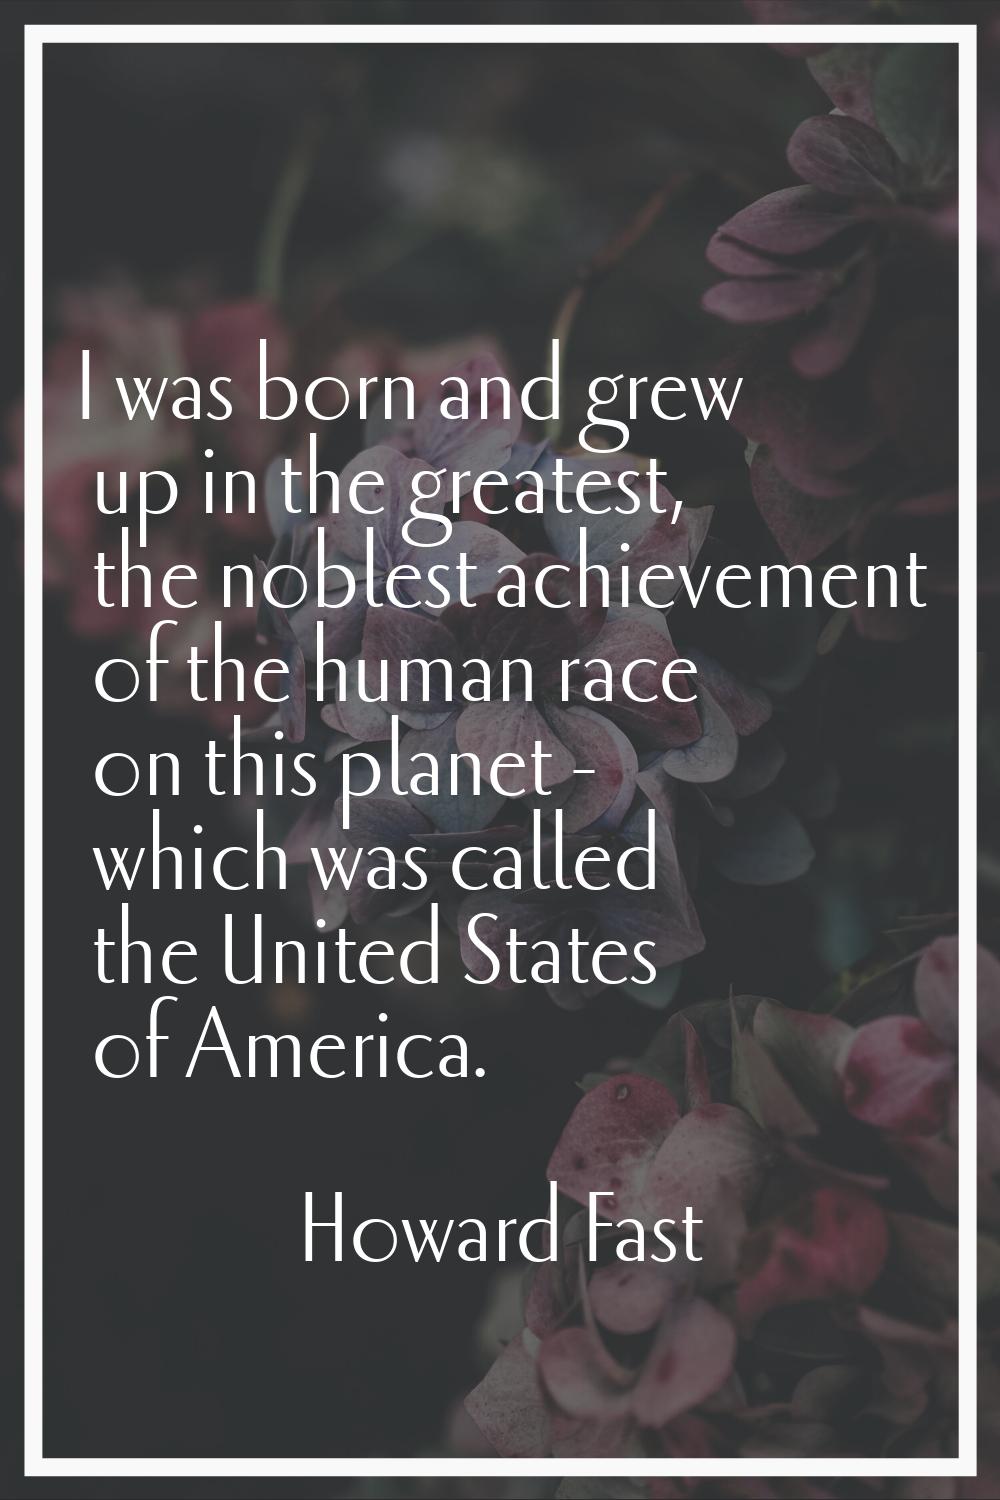 I was born and grew up in the greatest, the noblest achievement of the human race on this planet - 